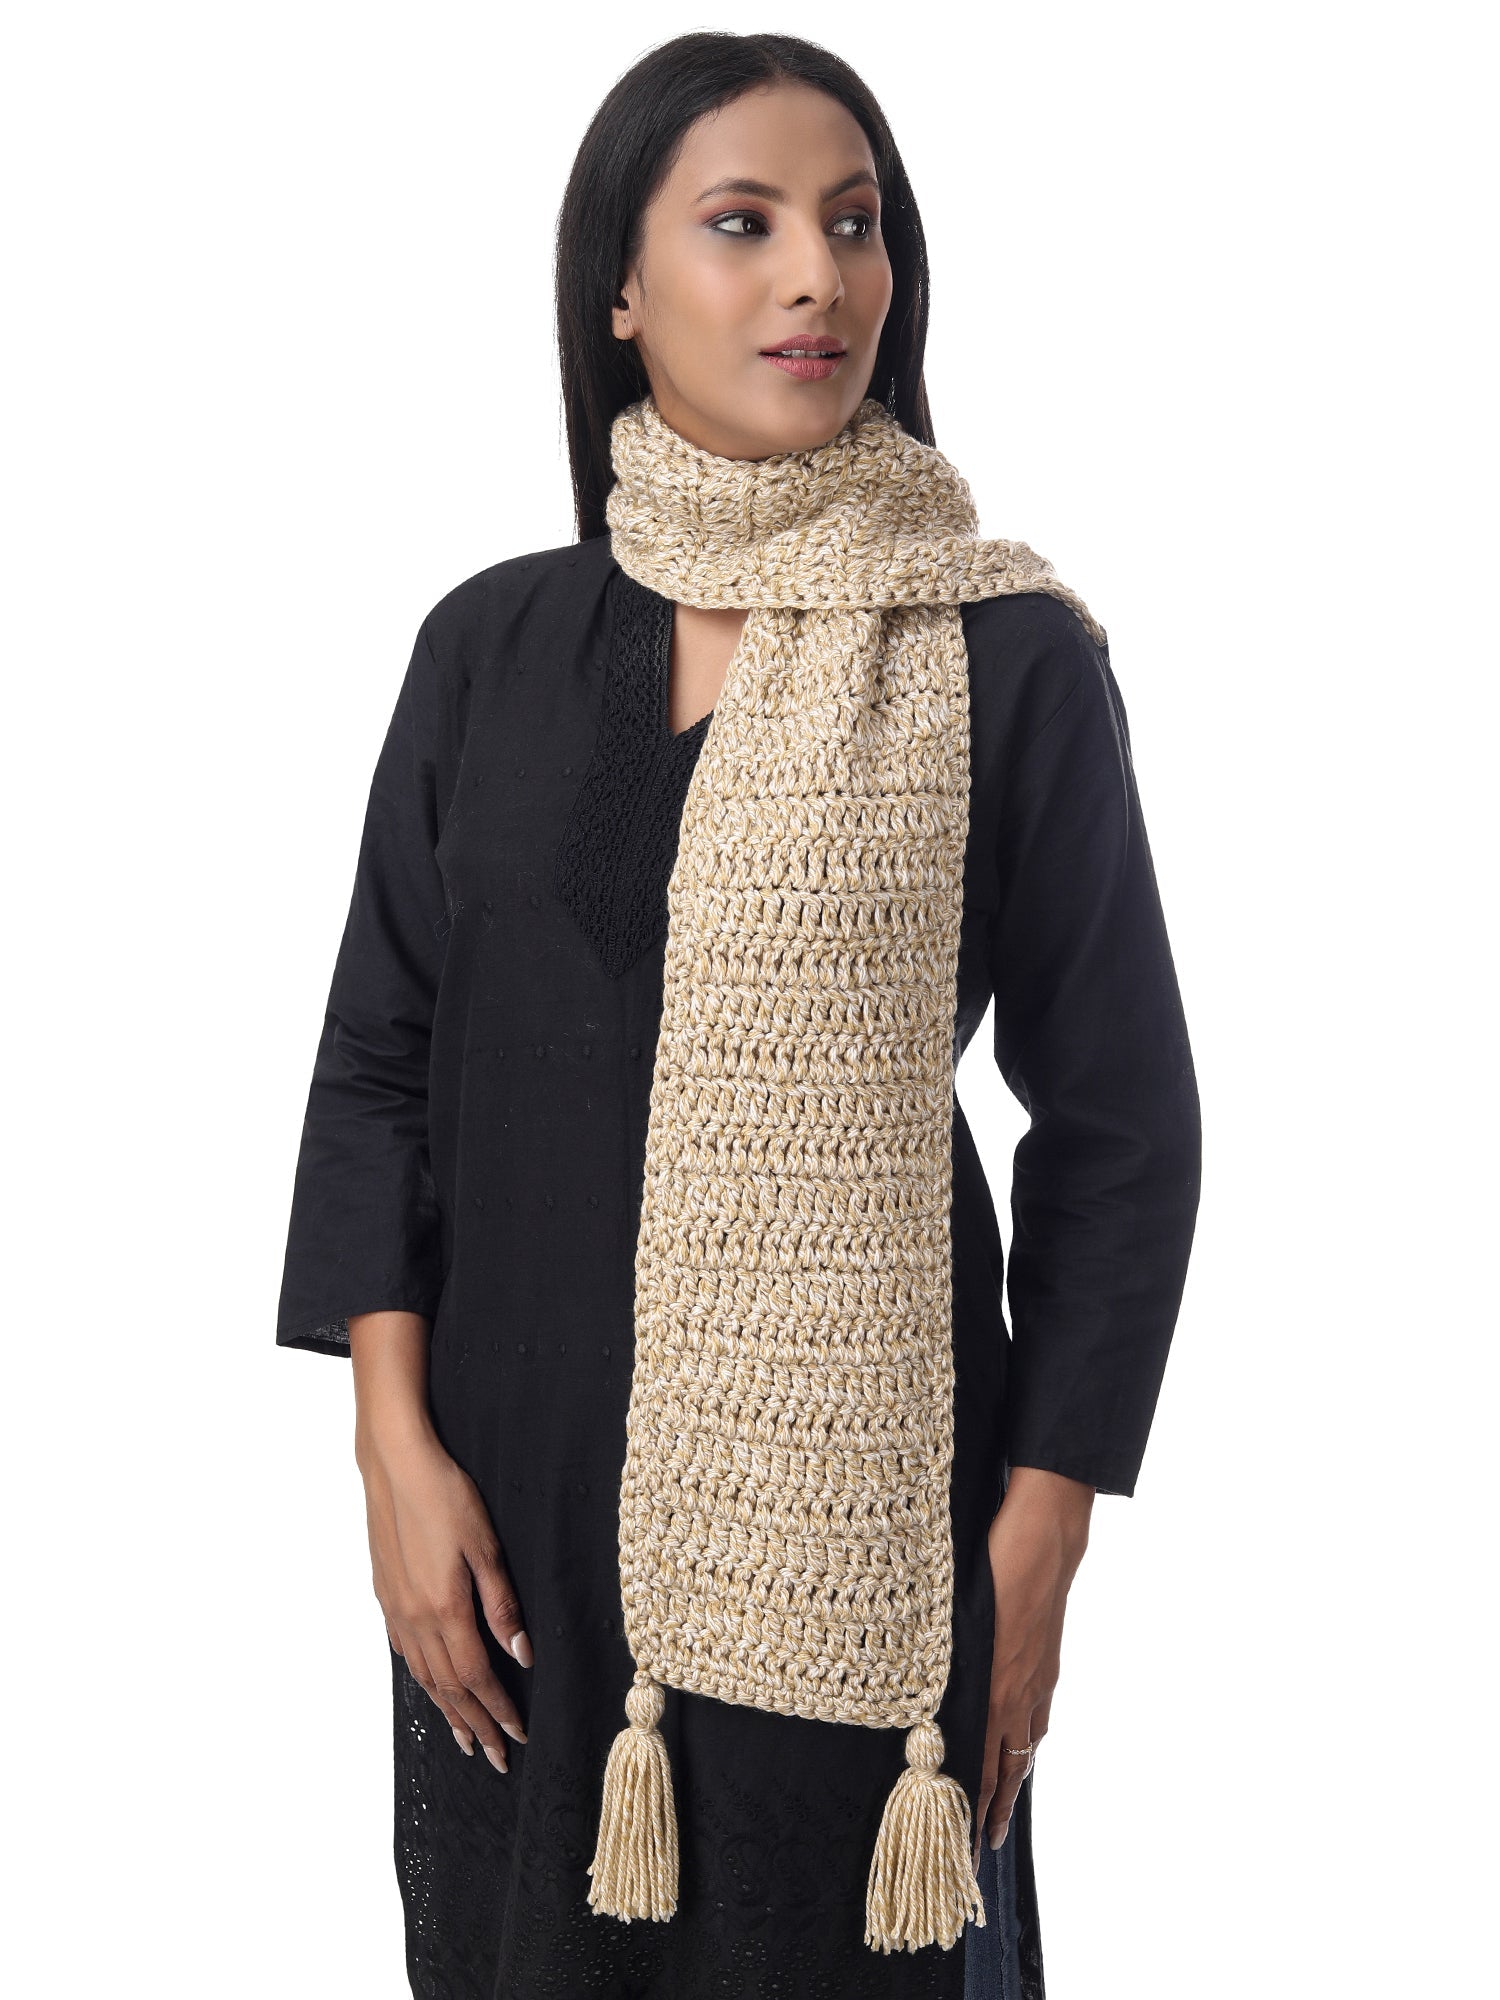 Neutral Tone Crochet Scarf Happy Cultures